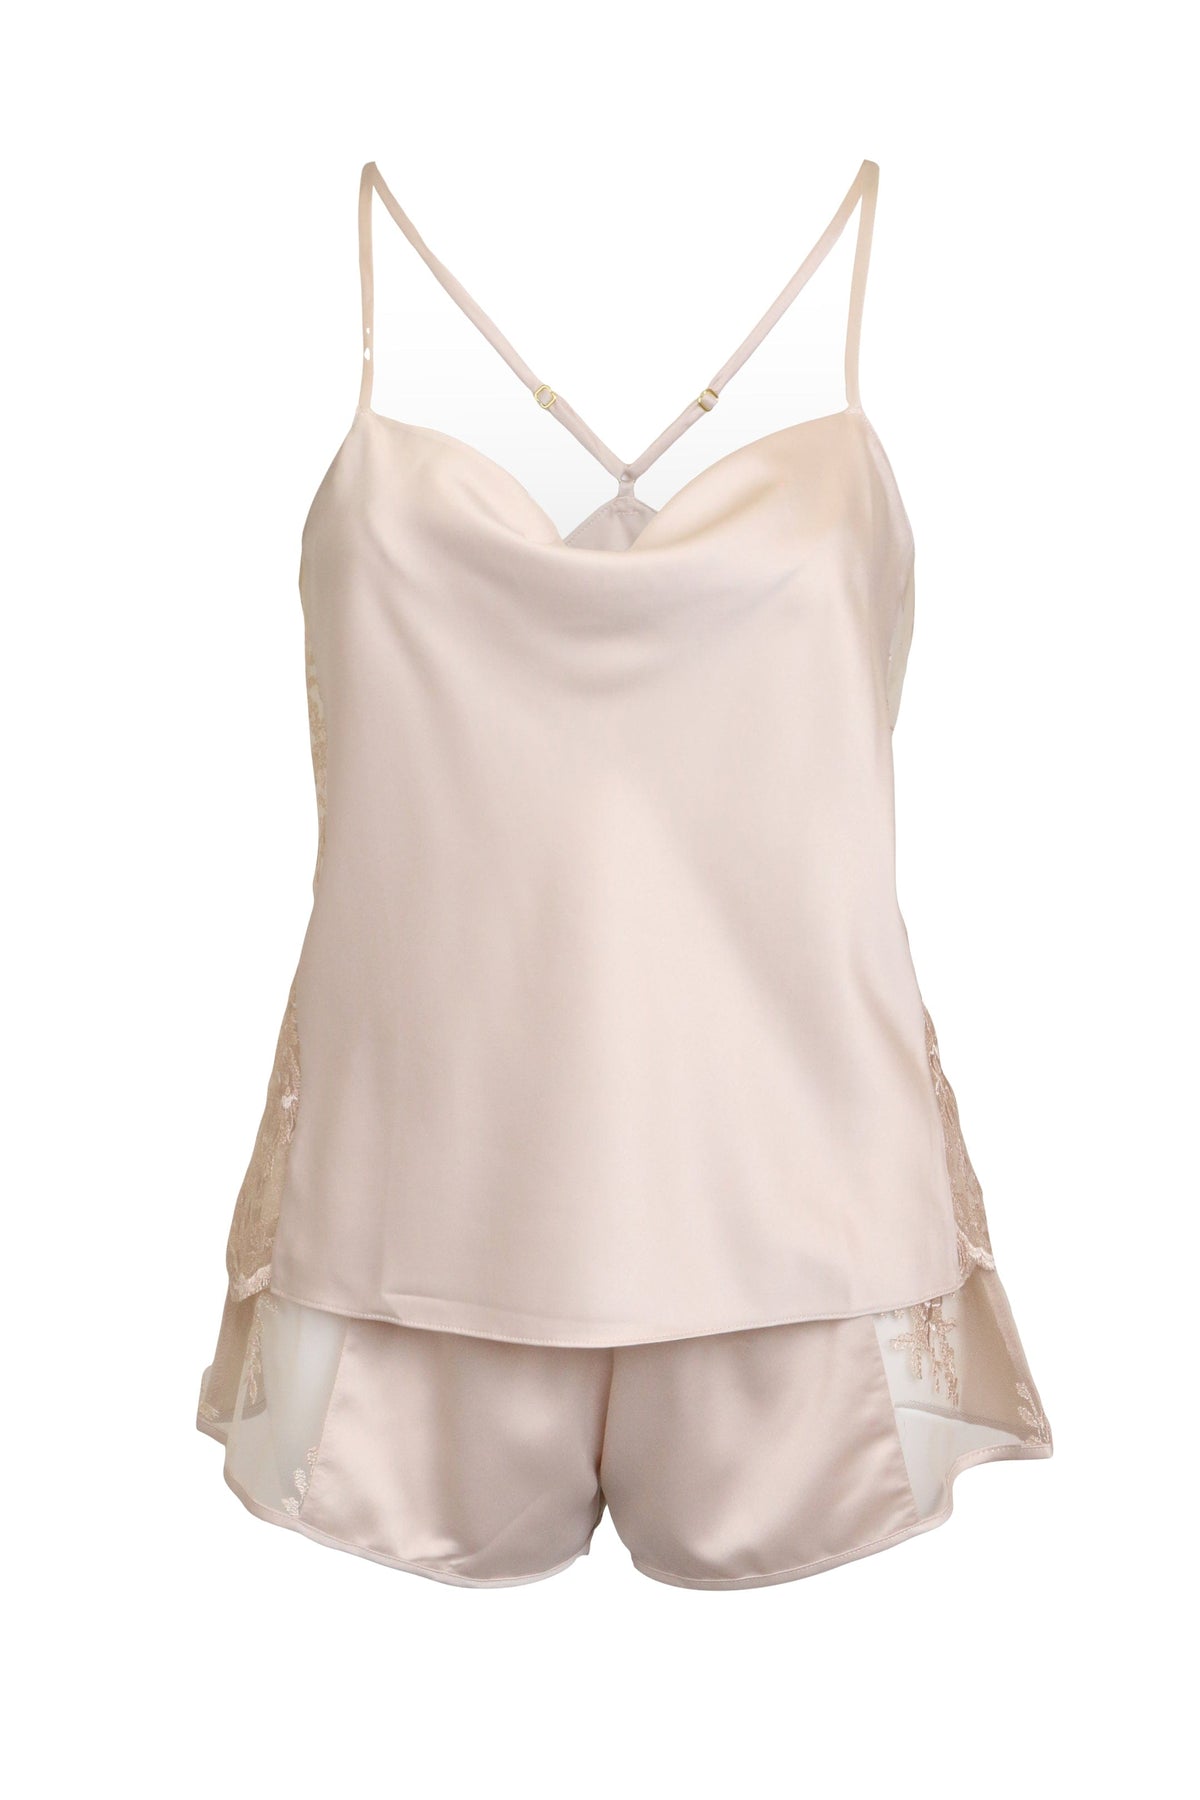 Rya Collection Tops Champagne / XS Darling Cami Tap Set - Champagne